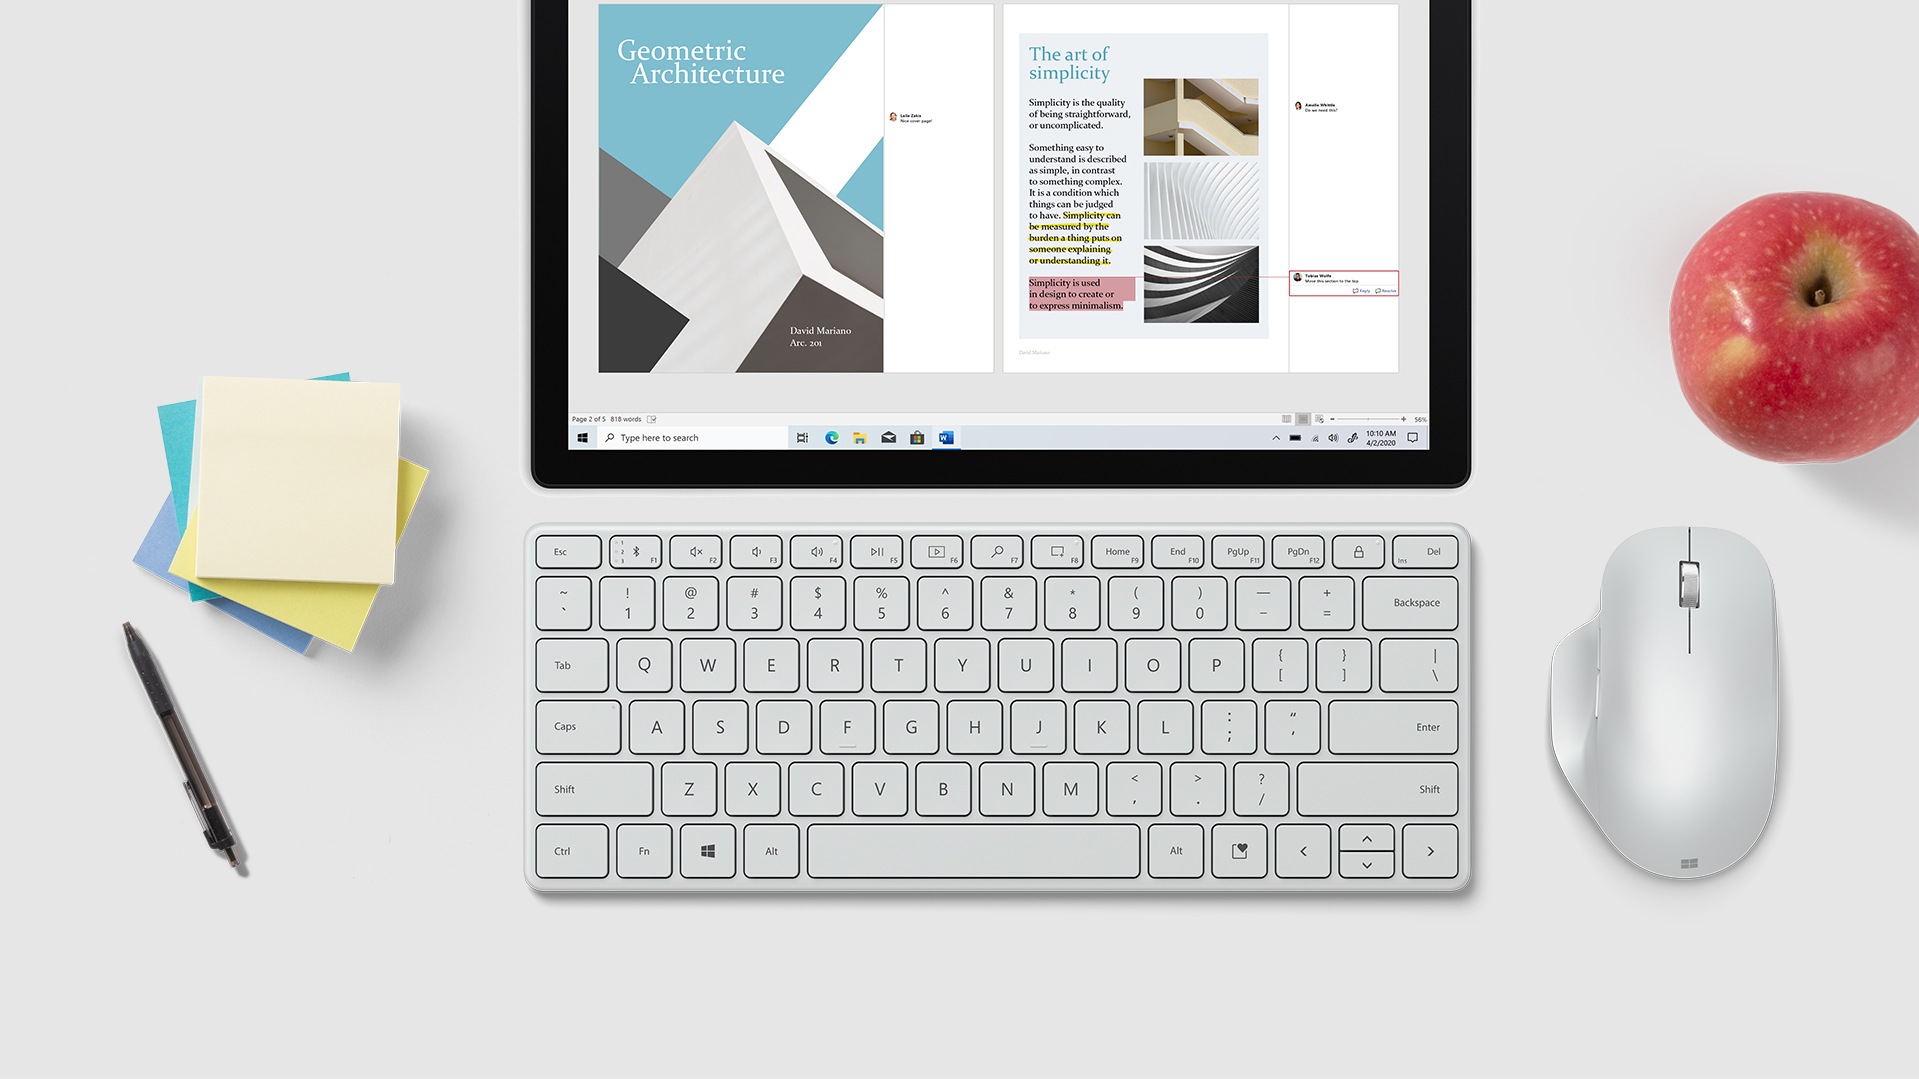 Microsoft Designer Compact Keyboard sits in front on a tablet screen next to a Microsoft mouse, pieces of paper and a pen.